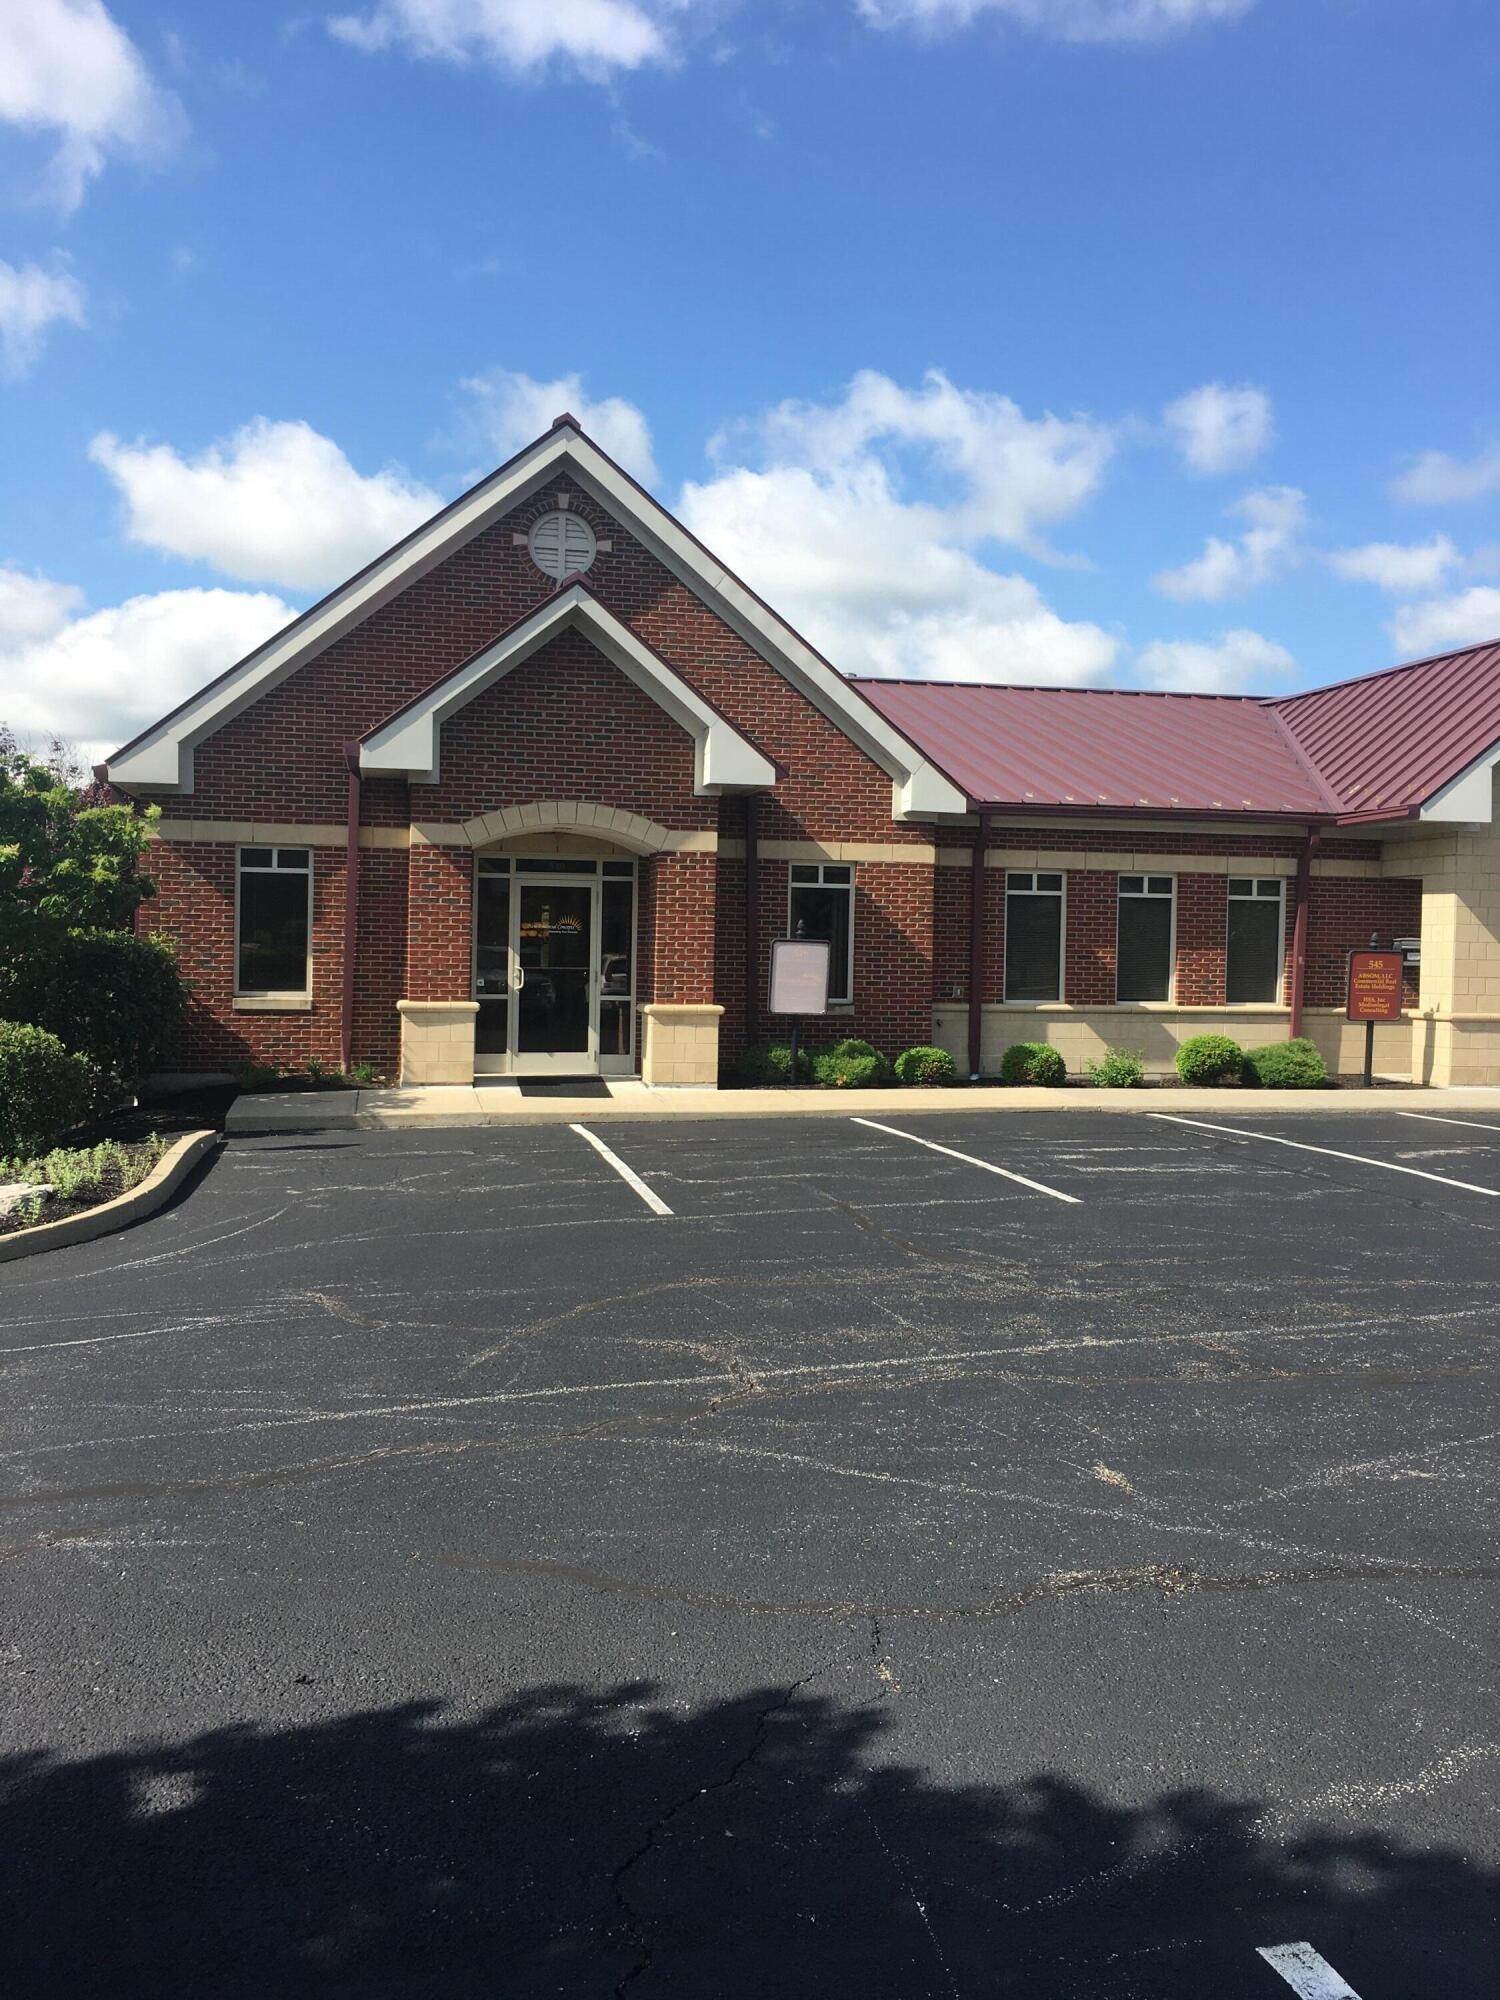 Offices for Sale at 549 Centre View Boulevard Crestview Hills, Kentucky 41017 United States